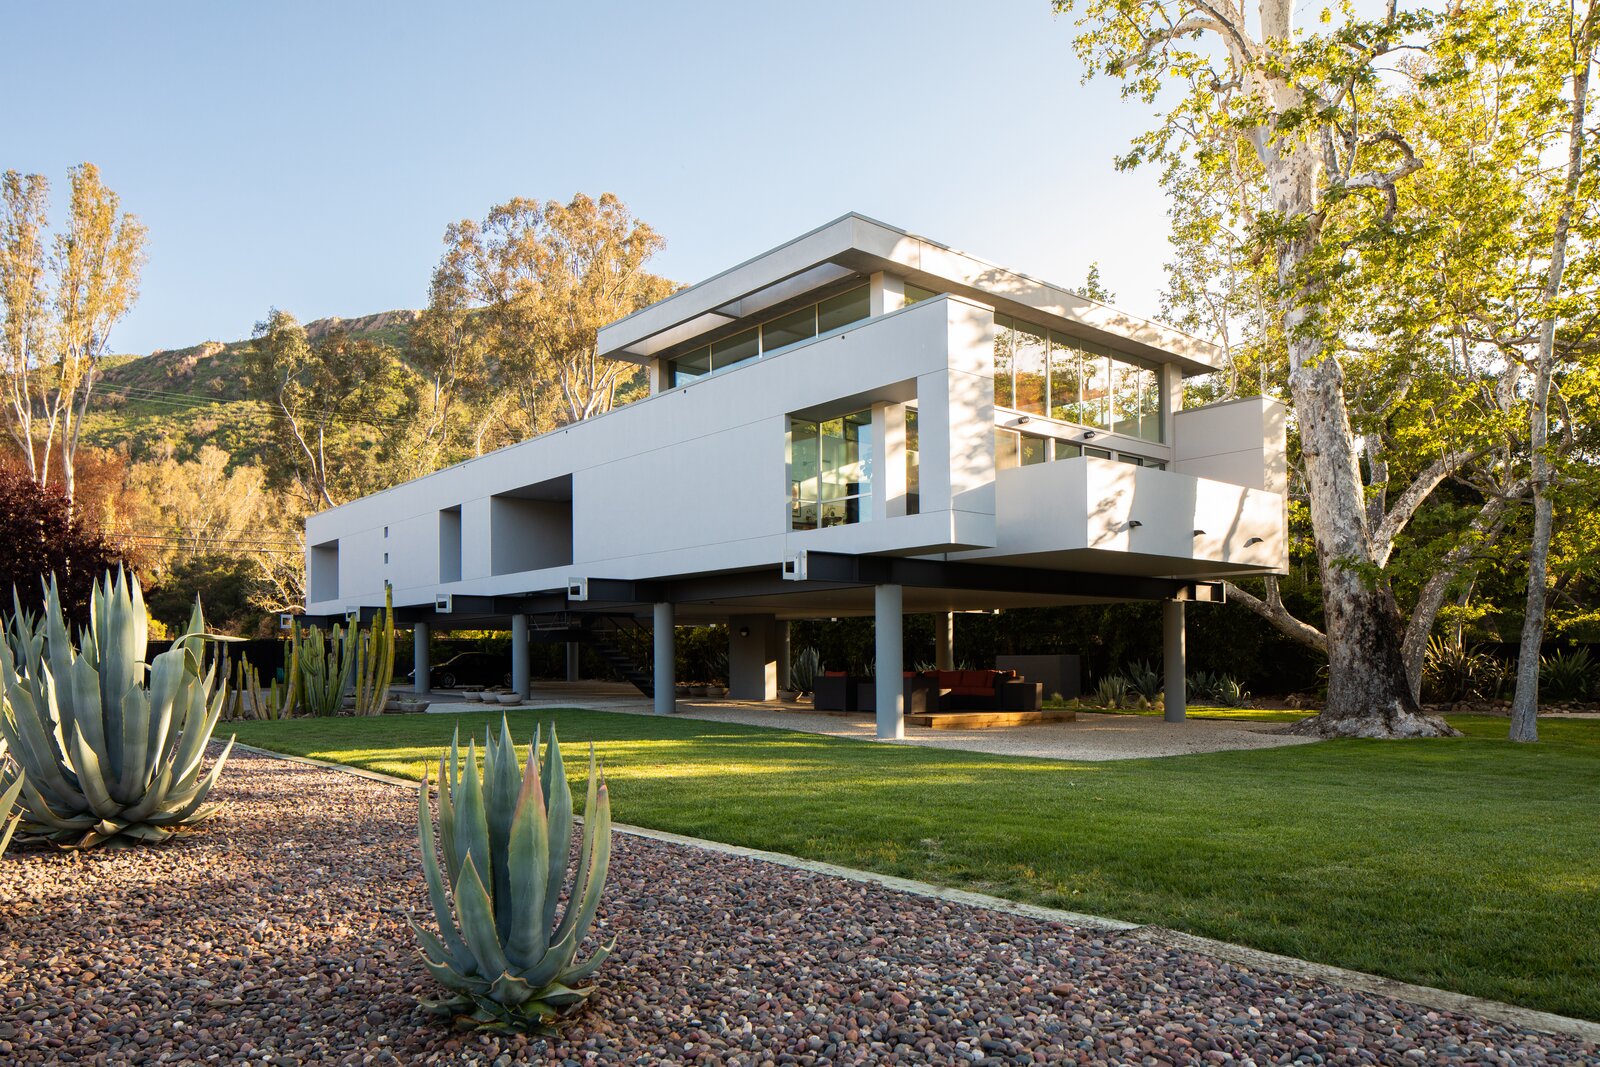 A Striking Home on Stilts in the Santa Monica Mountains